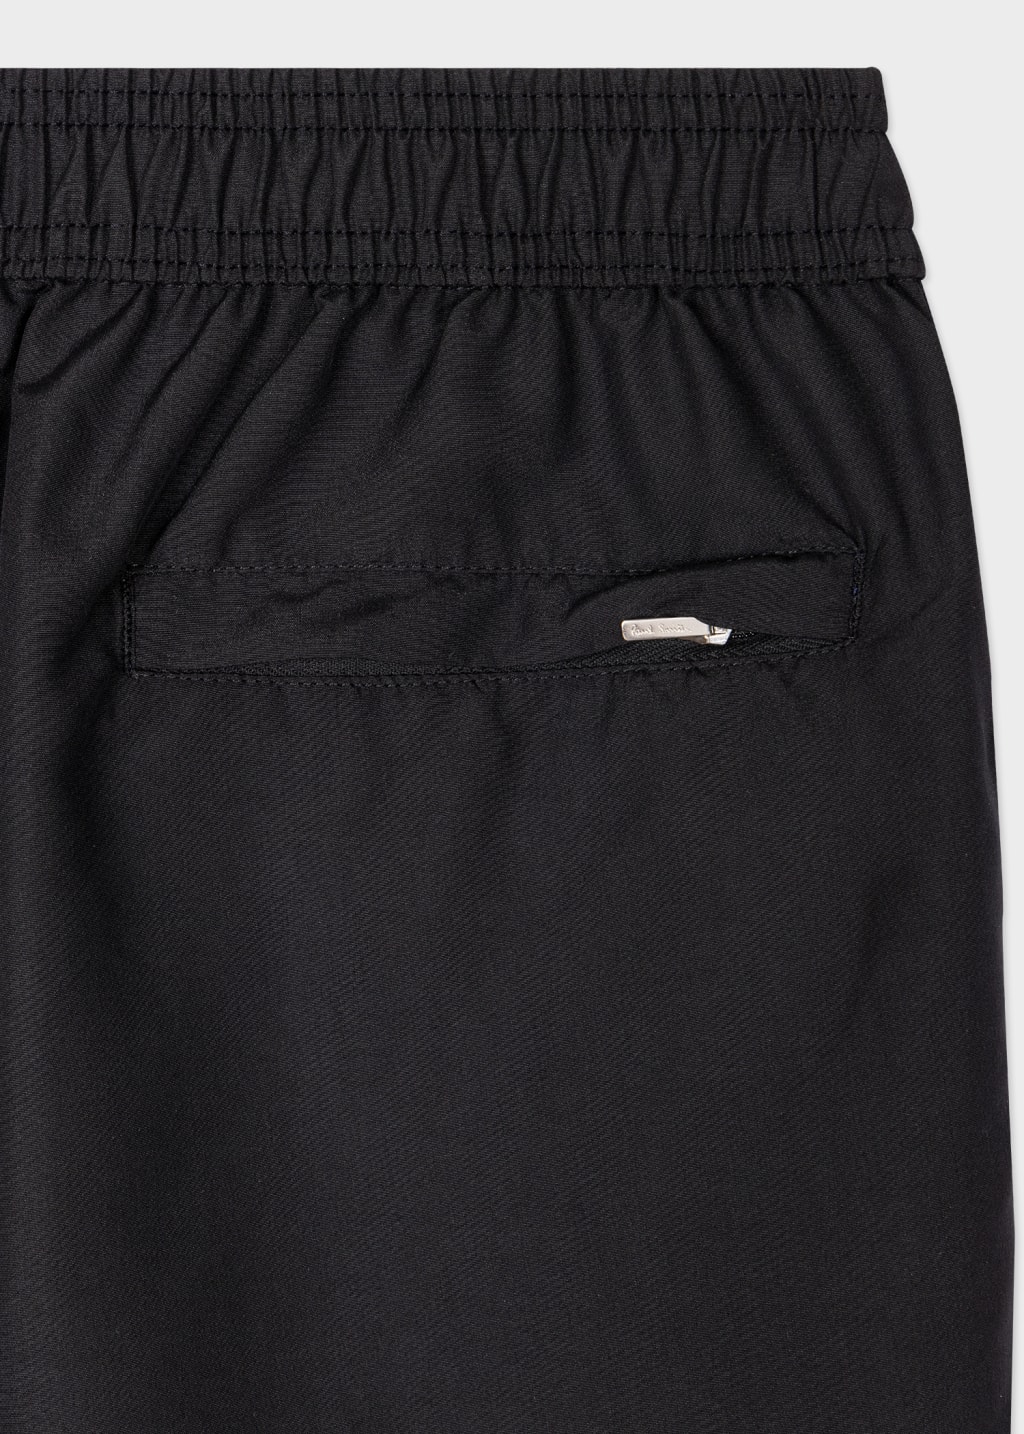 Detail View - Black Recycled-Polyester 'Signature Stripe' Swim Shorts Paul Smith